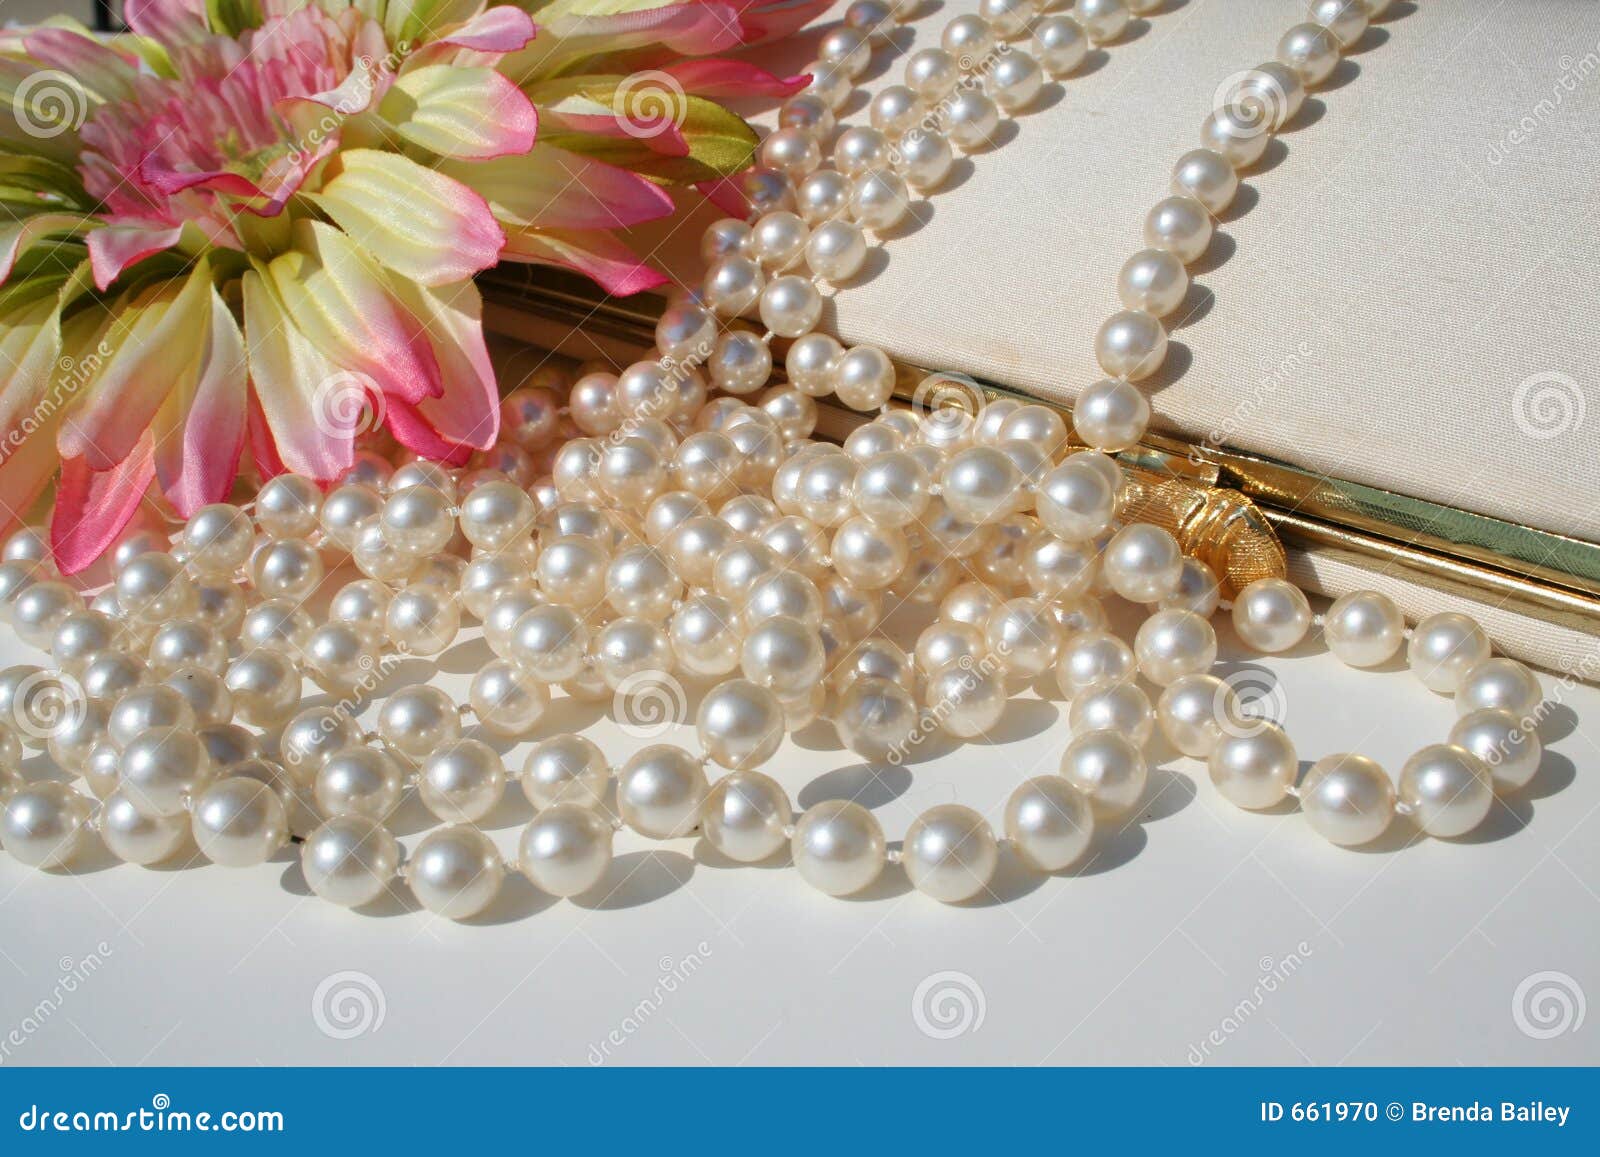 pearls and vintage purse